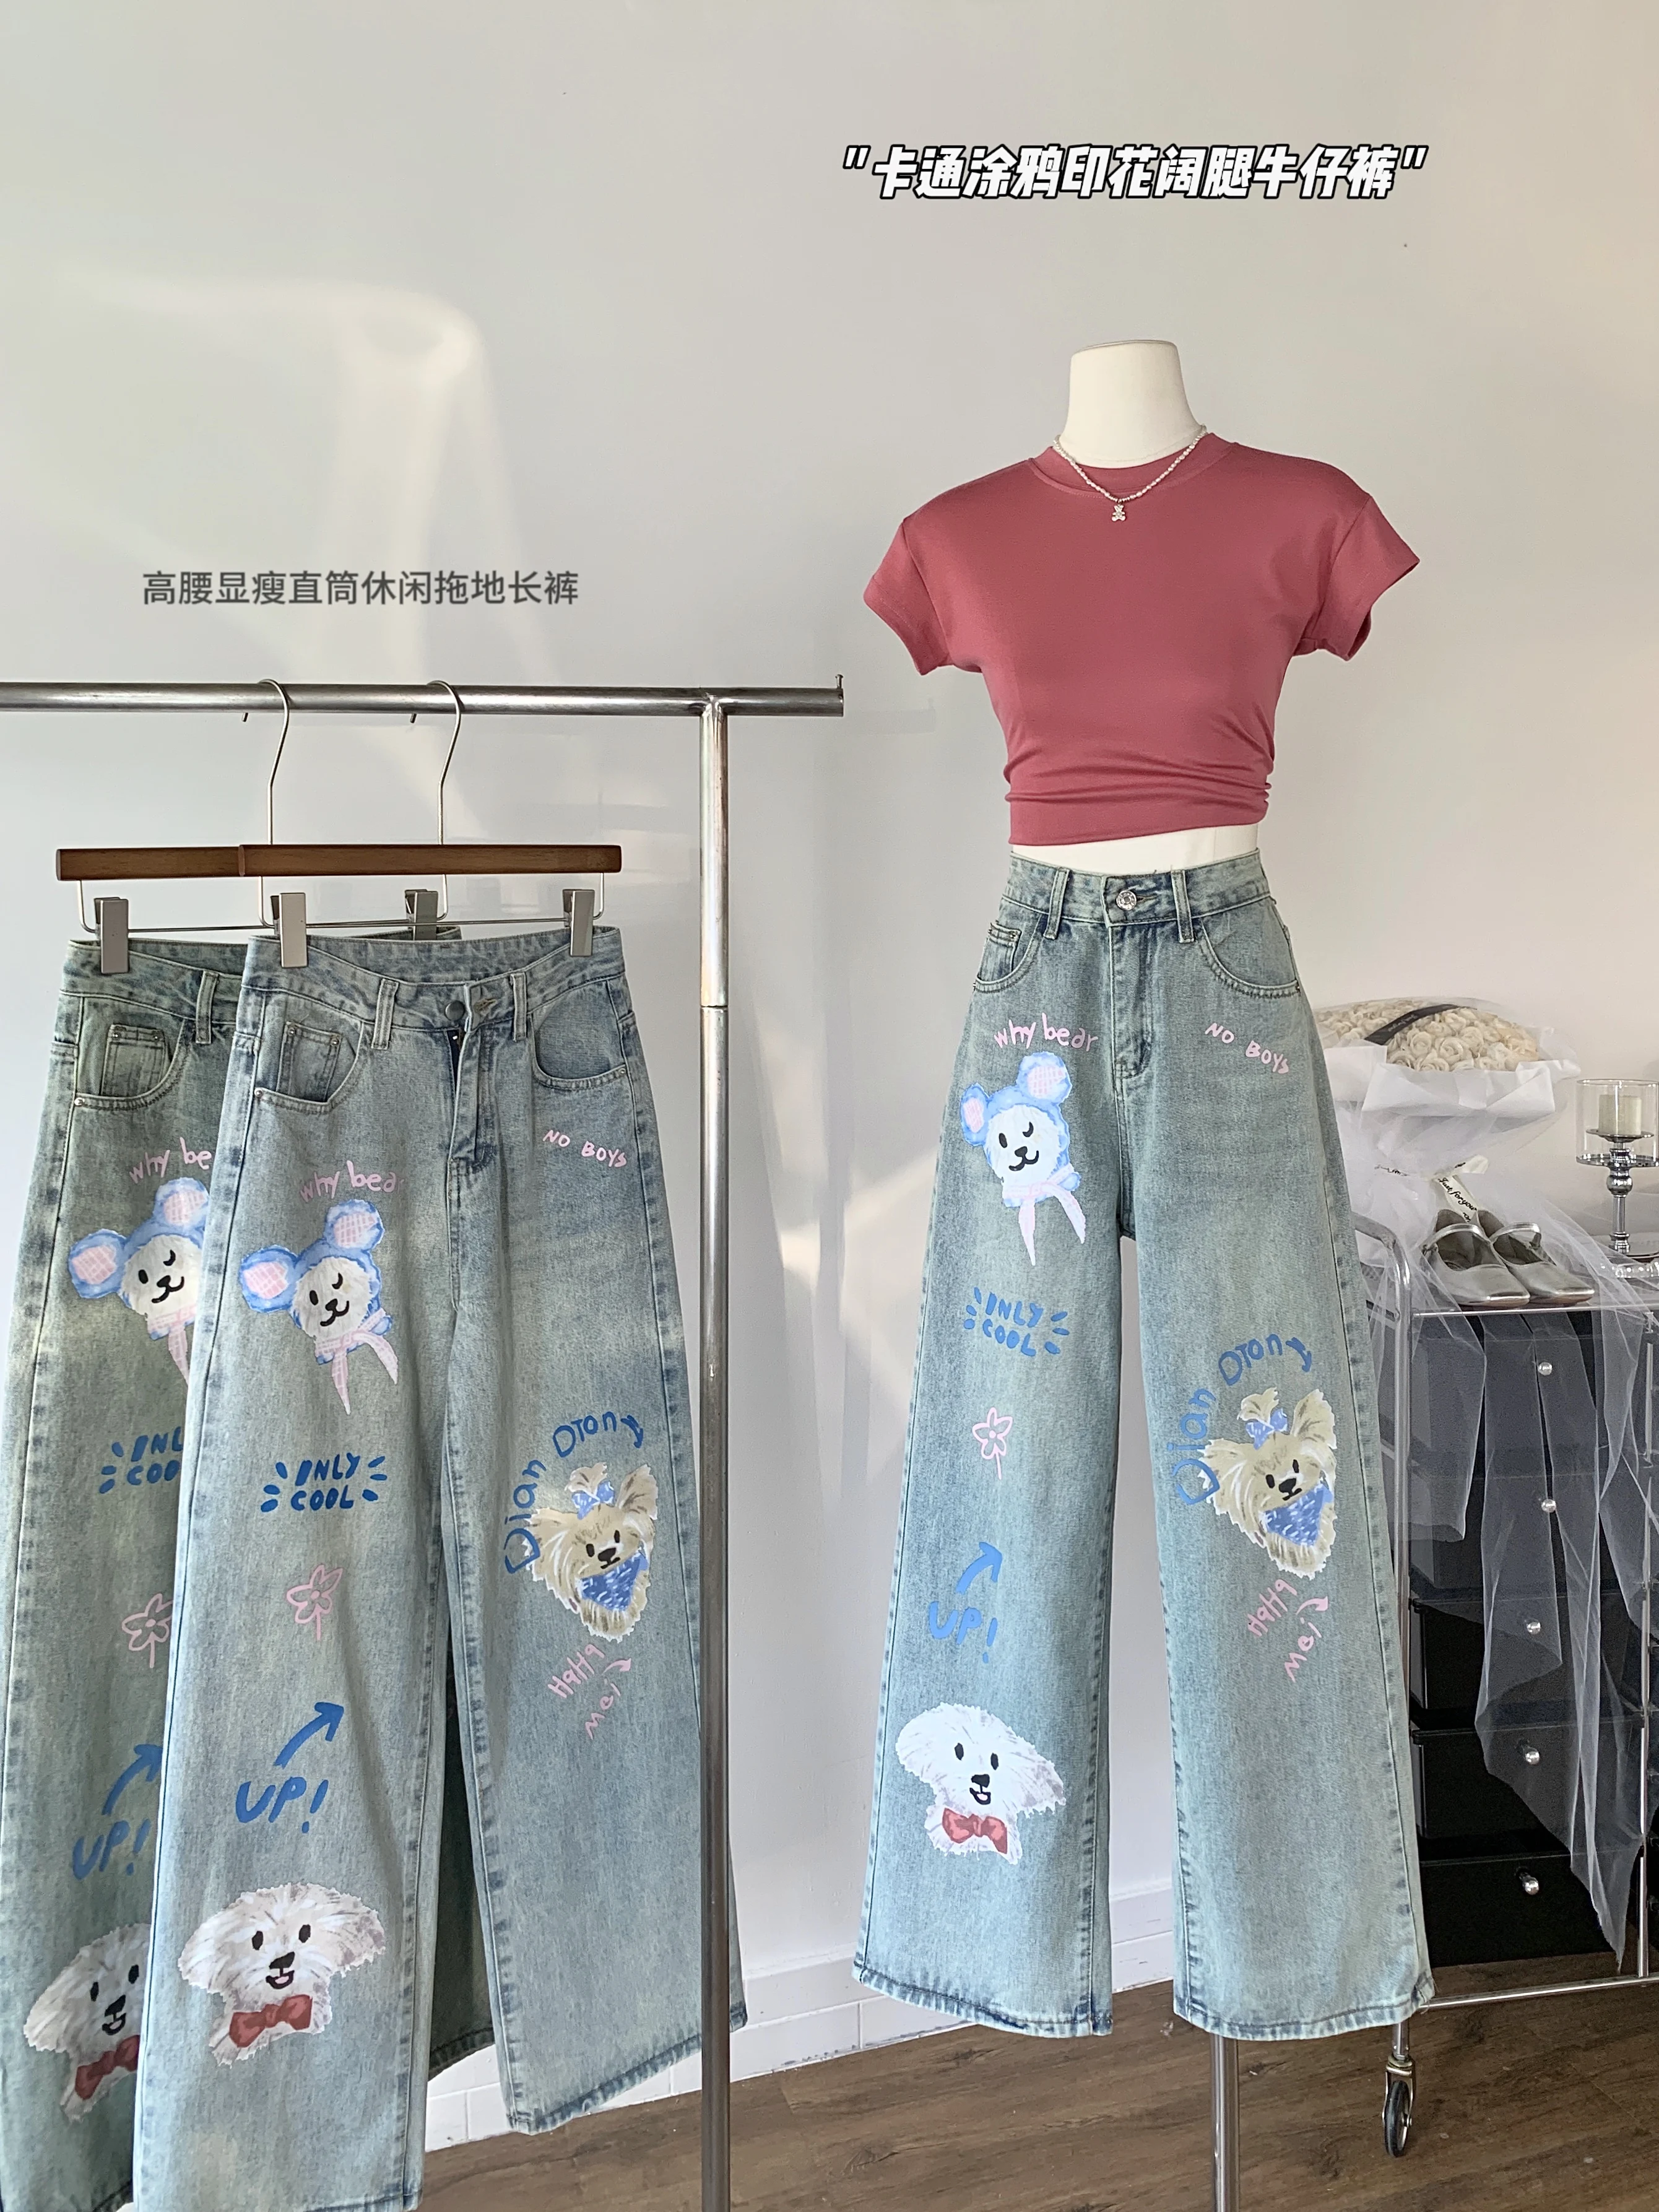 

Women's Graphic Print Jeans Harajuku Aesthetic Y2k Baggy Denim Trousers Japanese 2000s Style Jean Pants Vintage Trashy Clothes